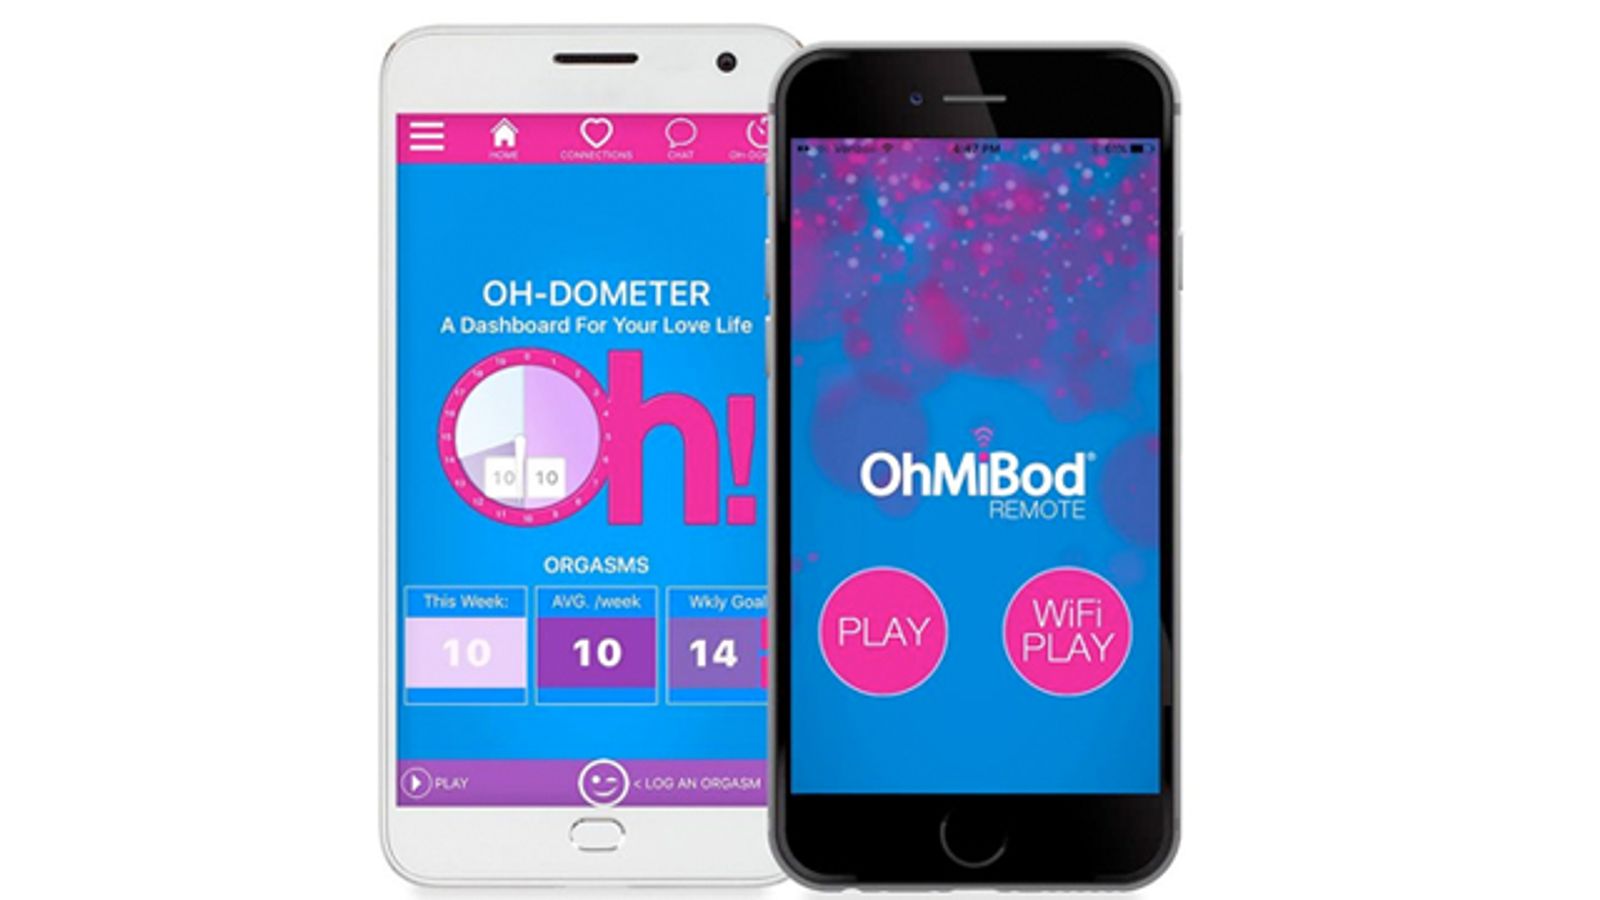 Ohmibod Remote Updated With ‘oh Dometer Dashboard For Love Life Avn